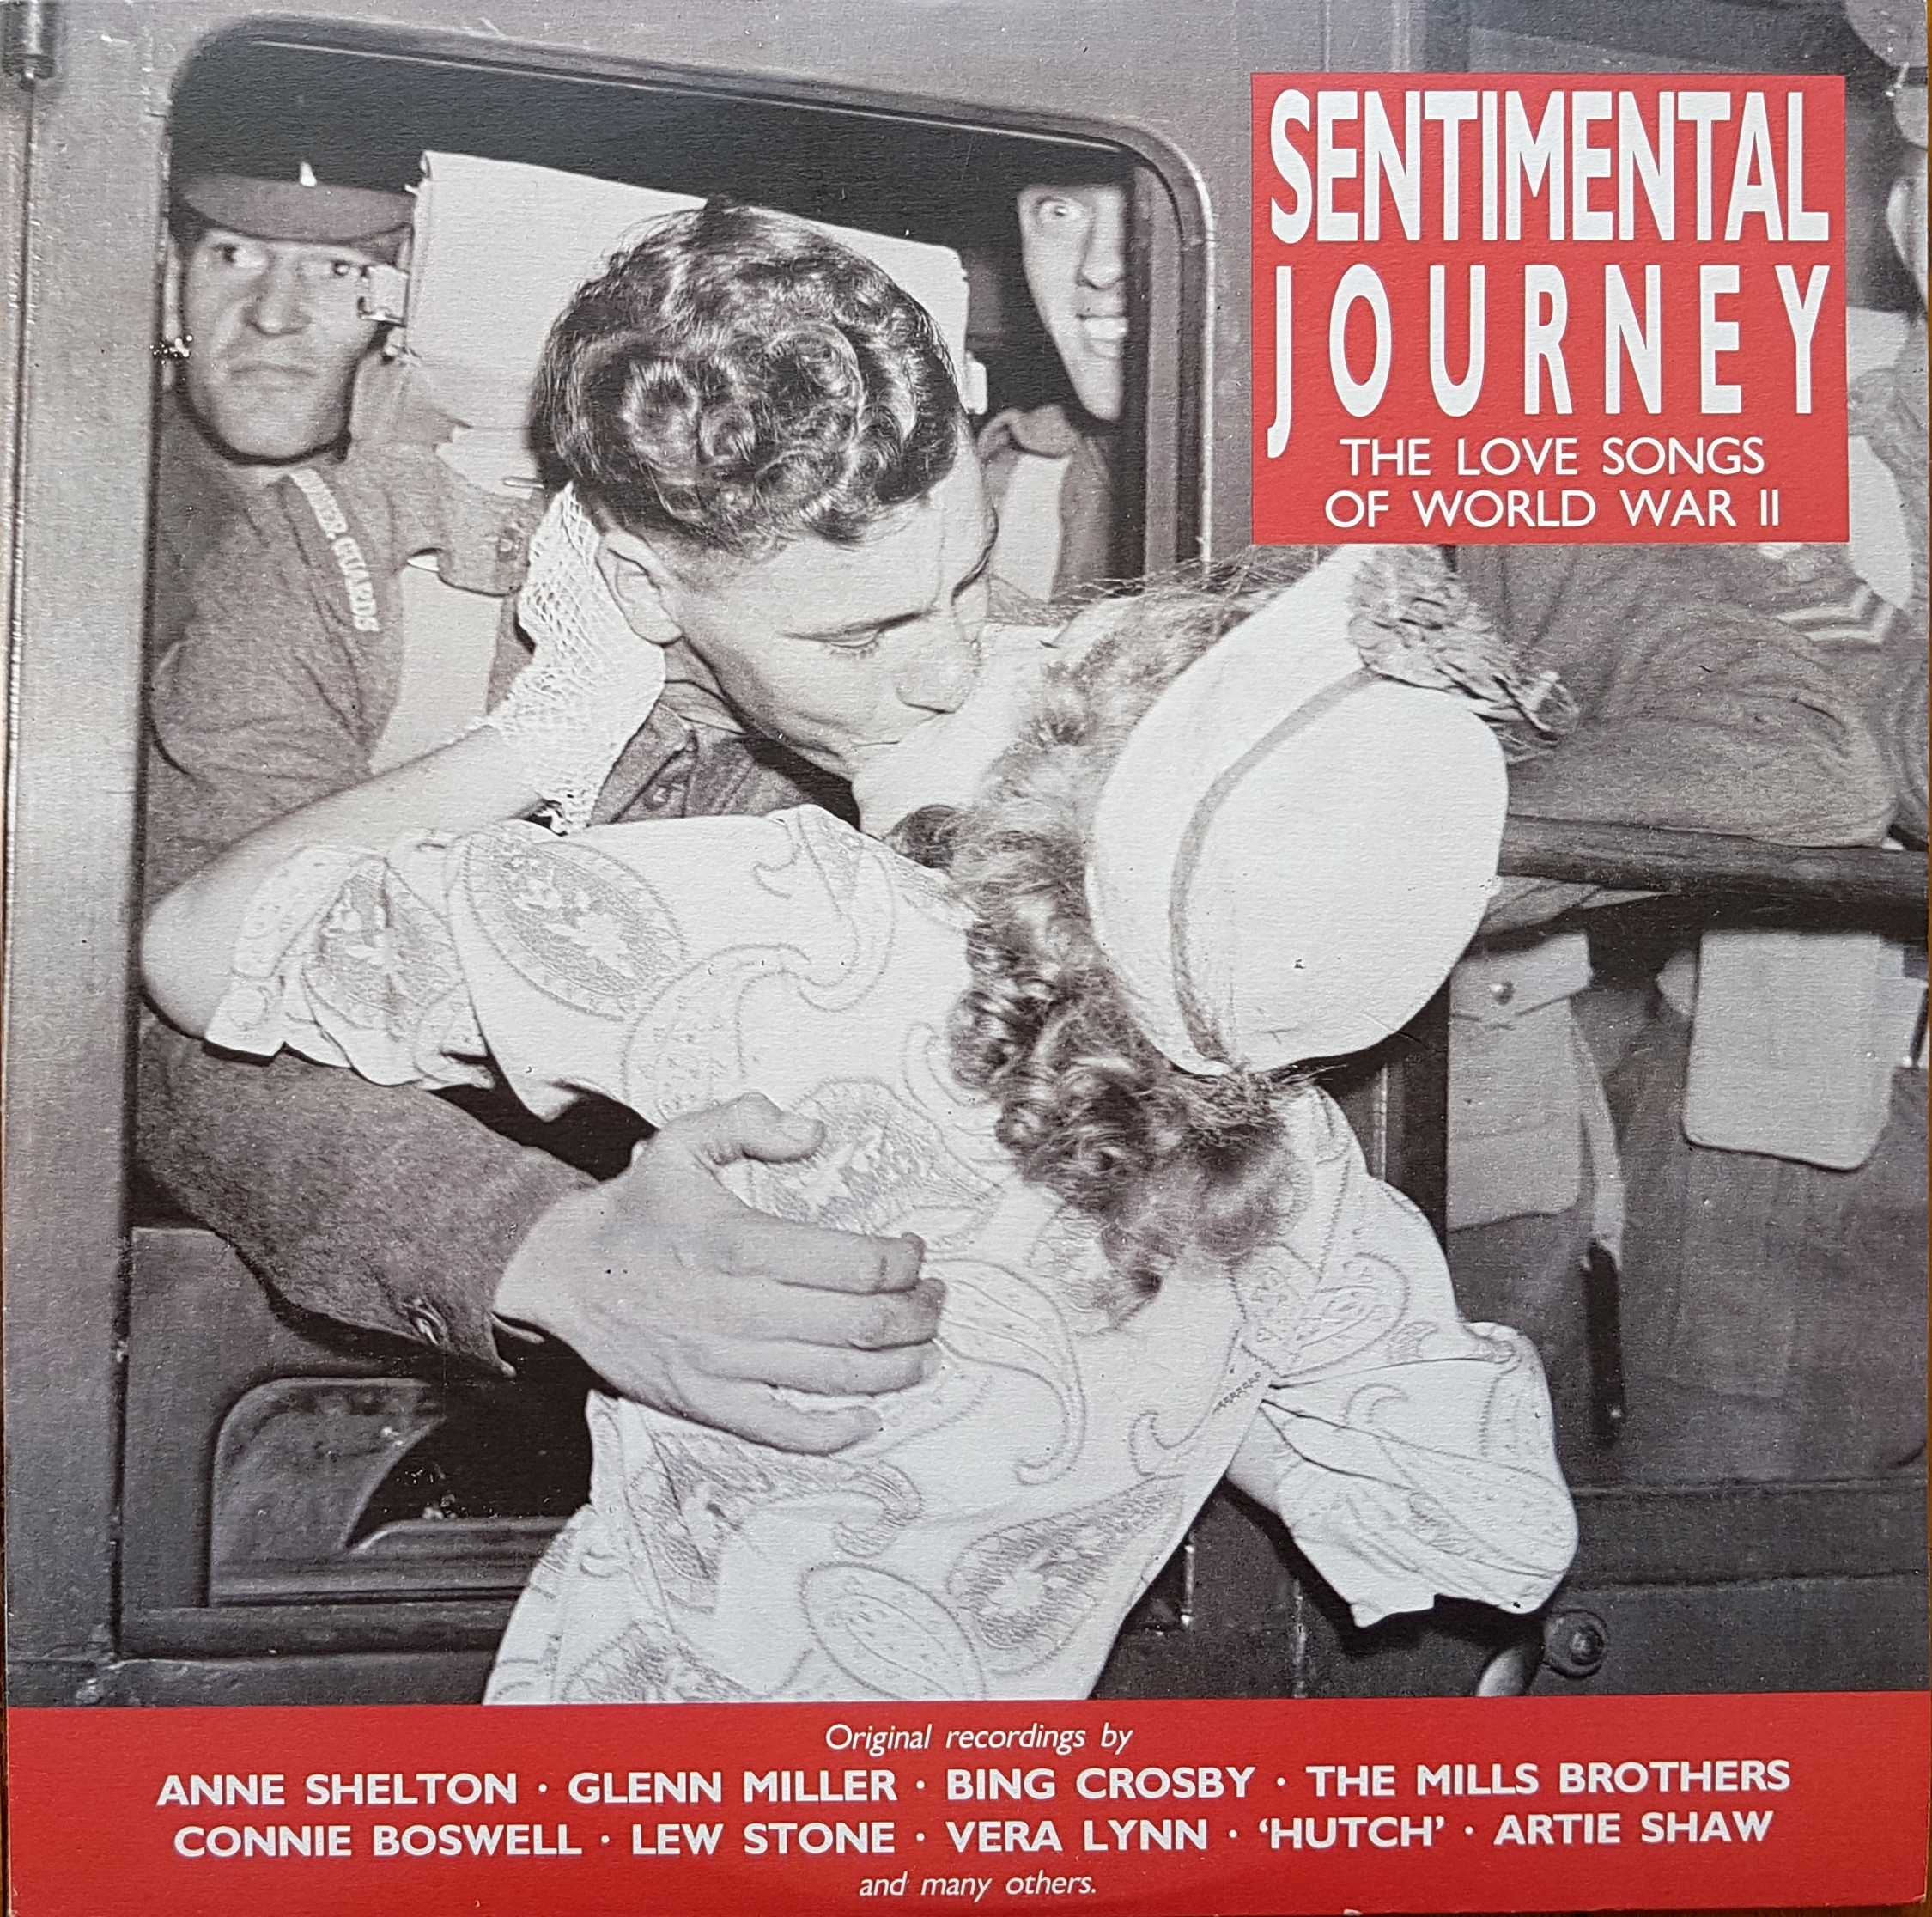 Picture of REQ 751 Sentimental journey by artist Various from the BBC records and Tapes library